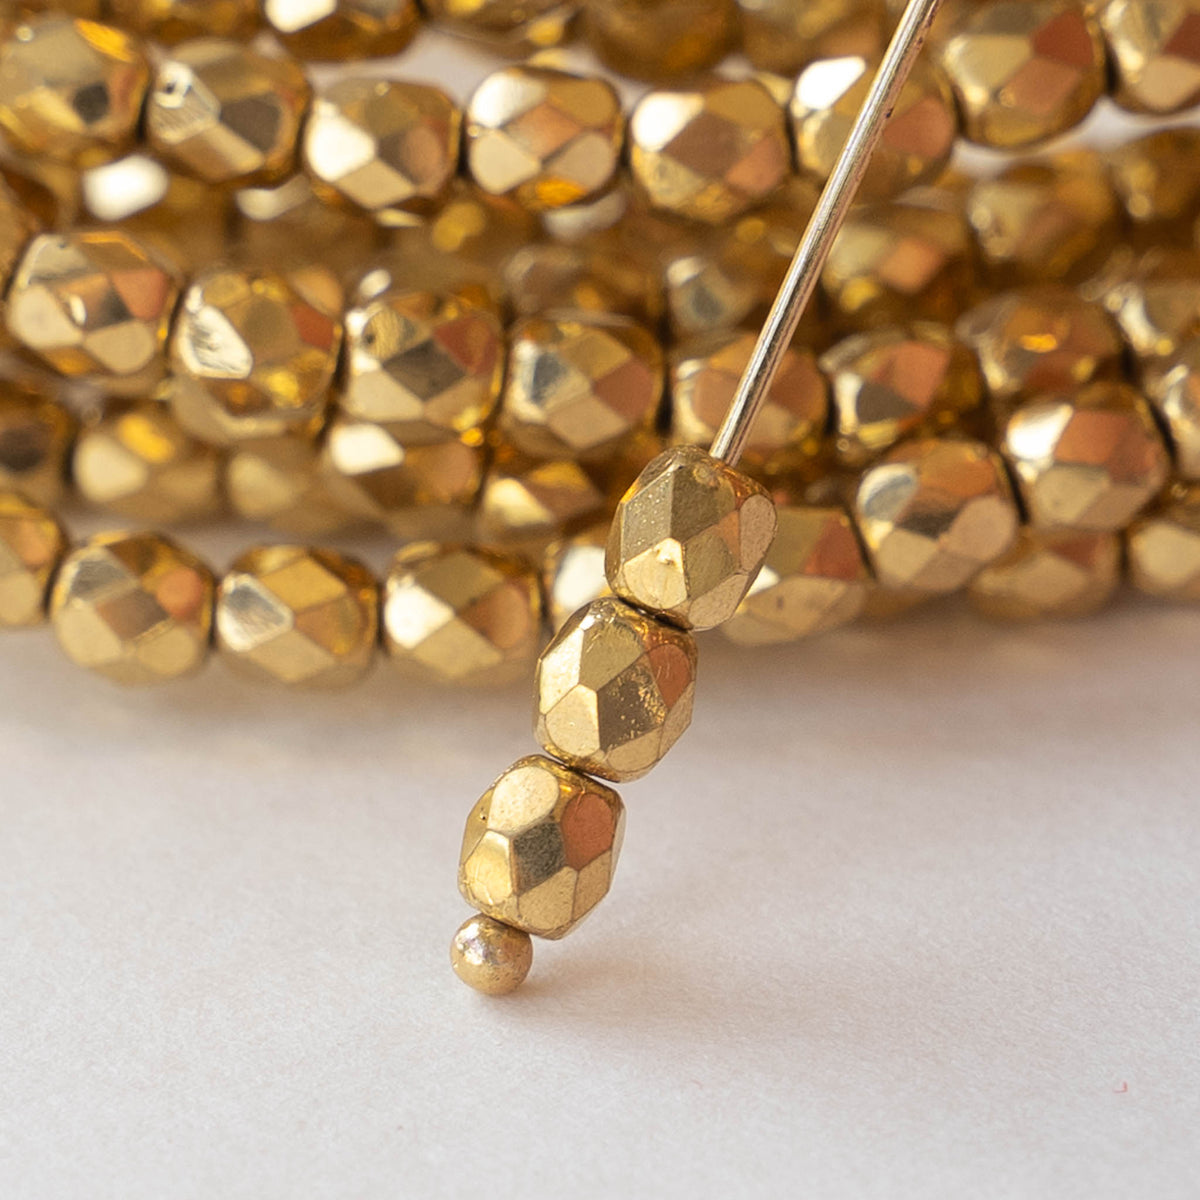 4mm Smooth Round Beads, 14K Gold Filled (50 Pieces)